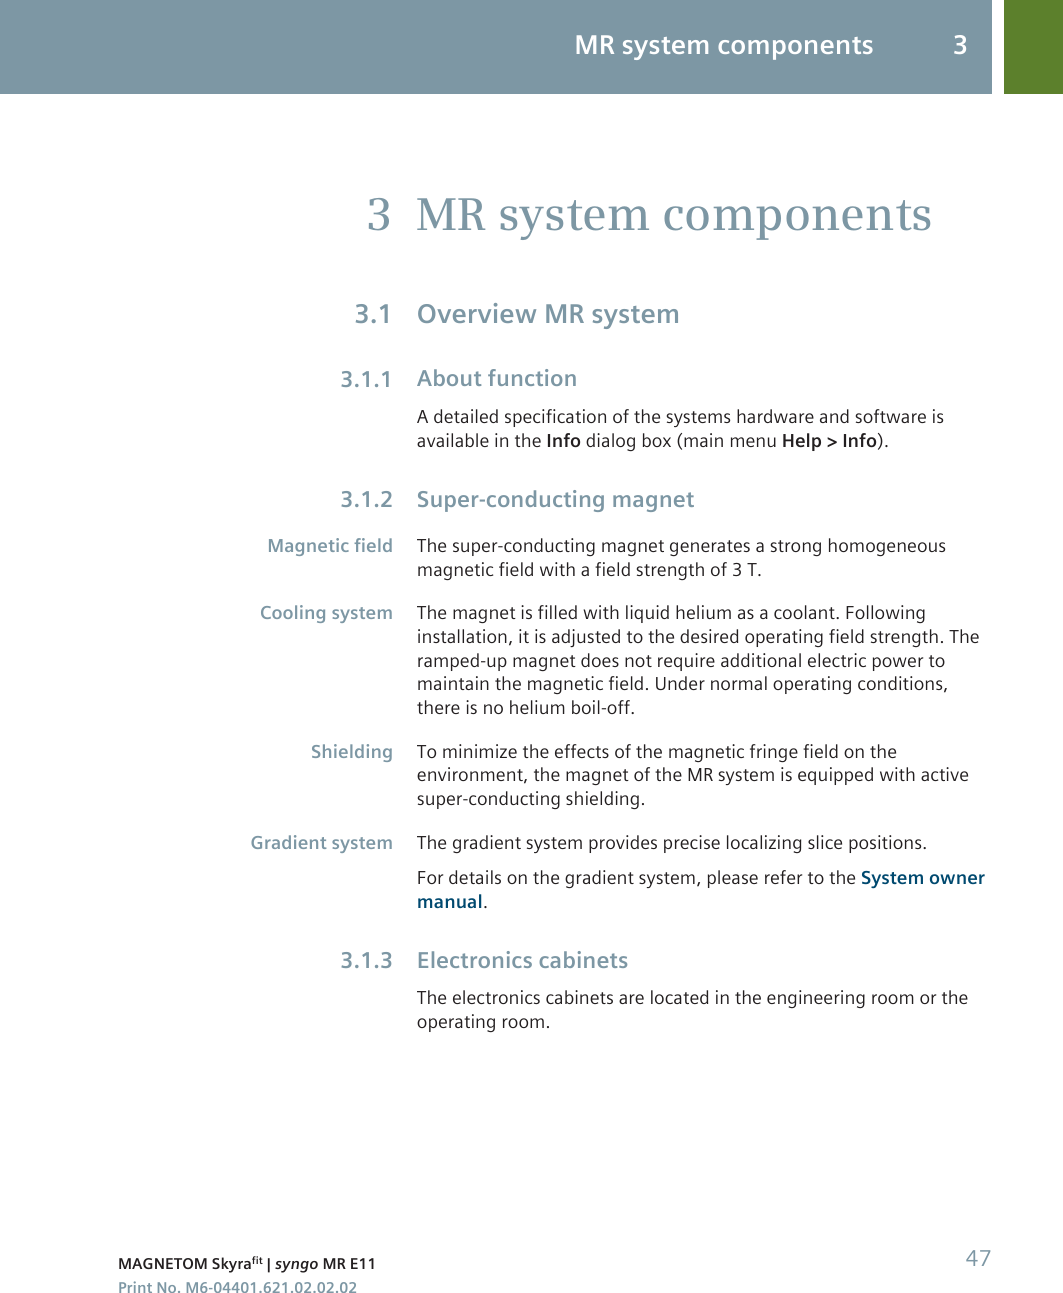 MR system componentsOverview MR systemAbout functionA detailed specification of the systems hardware and software isavailable in the Info dialog box (main menu Help &gt; Info).Super-conducting magnetThe super-conducting magnet generates a strong homogeneousmagnetic field with a field strength of 3 T.The magnet is filled with liquid helium as a coolant. Followinginstallation, it is adjusted to the desired operating field strength. Theramped-up magnet does not require additional electric power tomaintain the magnetic field. Under normal operating conditions,there is no helium boil-off.To minimize the effects of the magnetic fringe field on theenvironment, the magnet of the MR system is equipped with activesuper-conducting shielding.The gradient system provides precise localizing slice positions.For details on the gradient system, please refer to the System ownermanual.Electronics cabinetsThe electronics cabinets are located in the engineering room or theoperating room.33.13.1.13.1.2Magnetic fieldCooling systemShieldingGradient system3.1.3MR system components 3MAGNETOM Skyrafit | syngo MR E11 47Print No. M6-04401.621.02.02.02